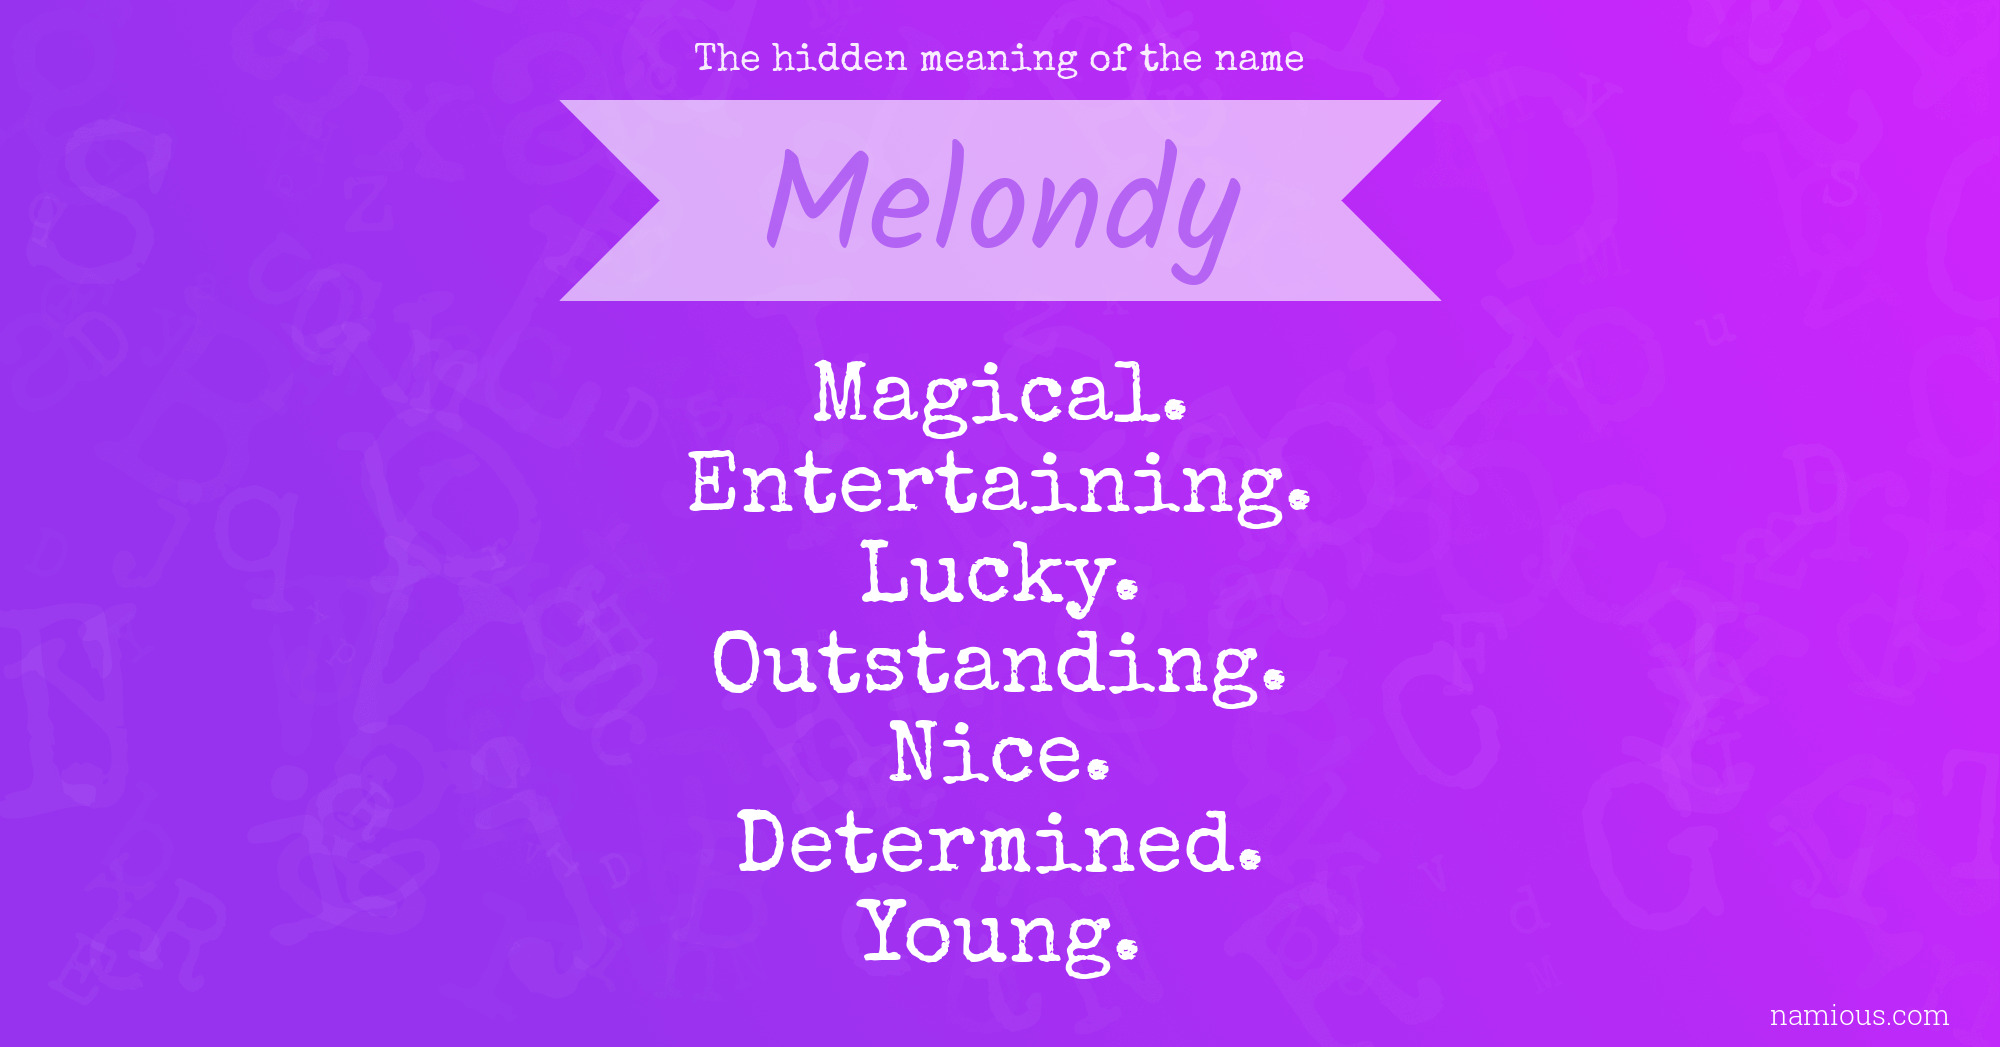 The hidden meaning of the name Melondy